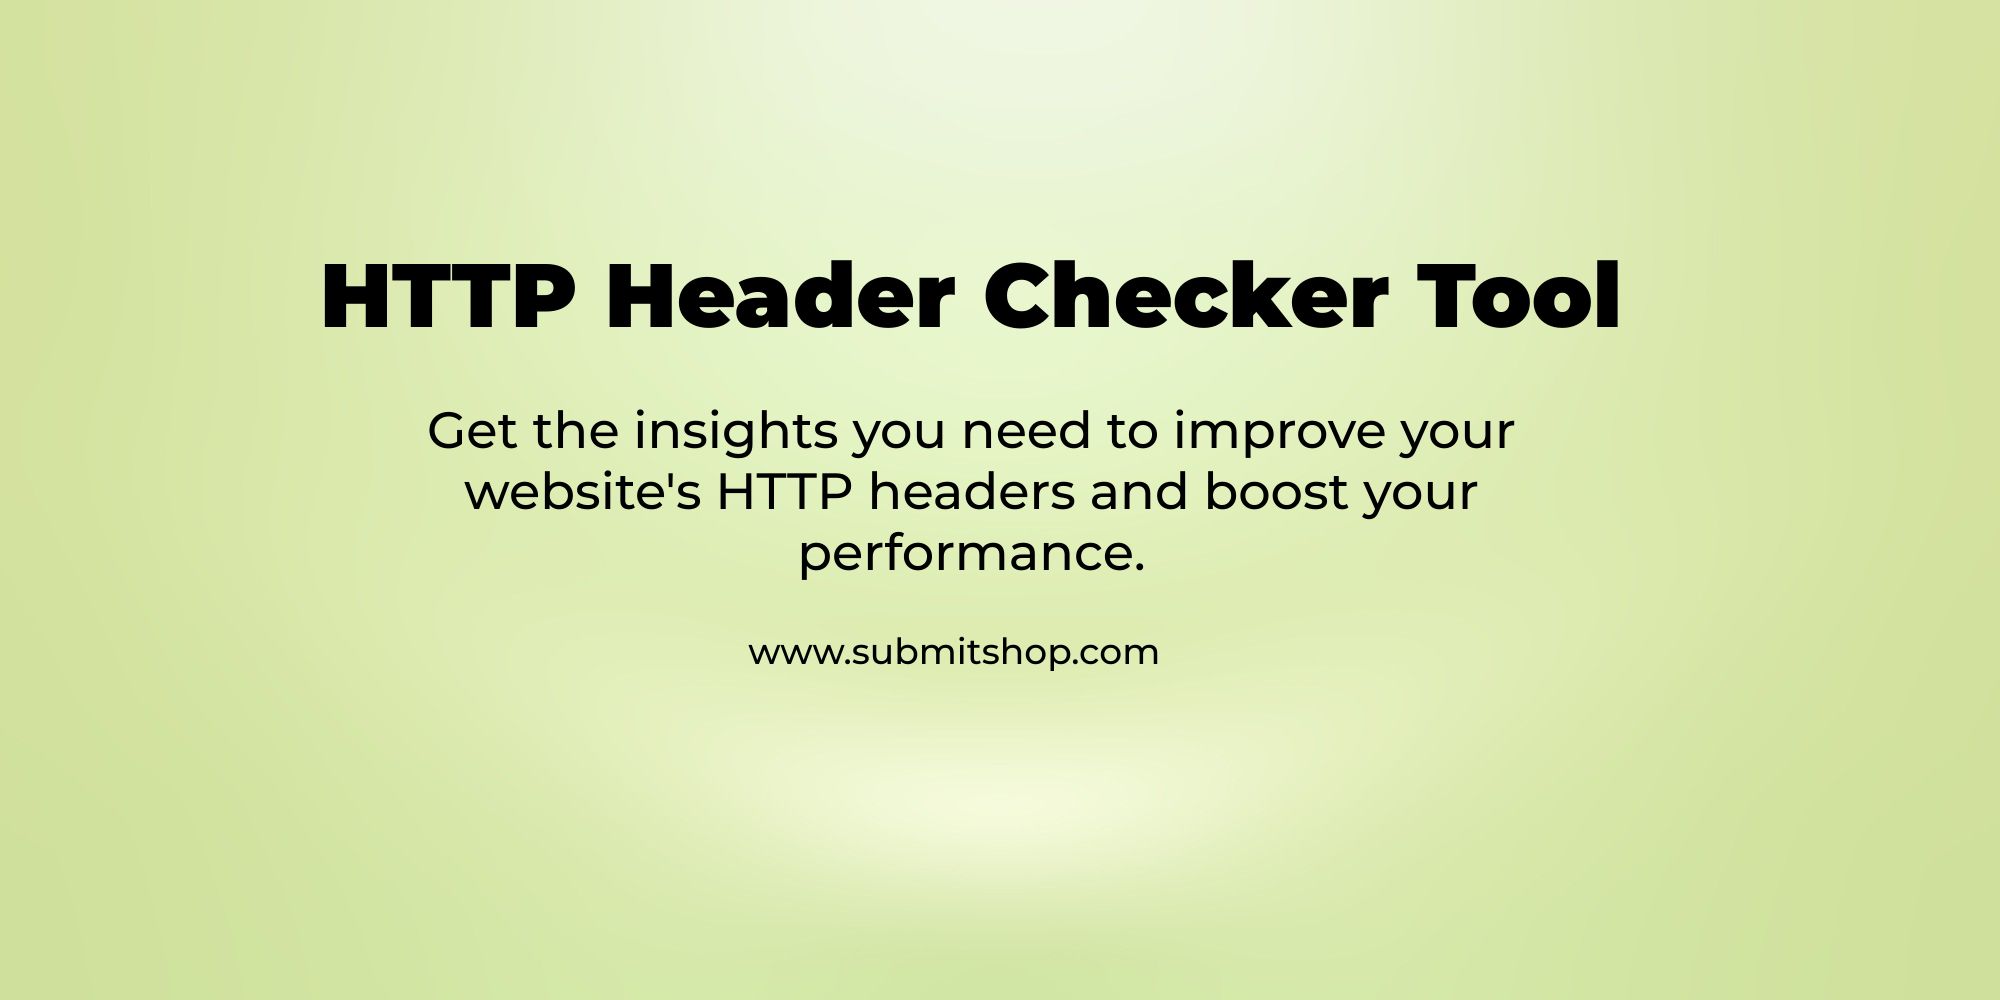 Get the insights you need to improve your website's HTTP headers and boost your performance.